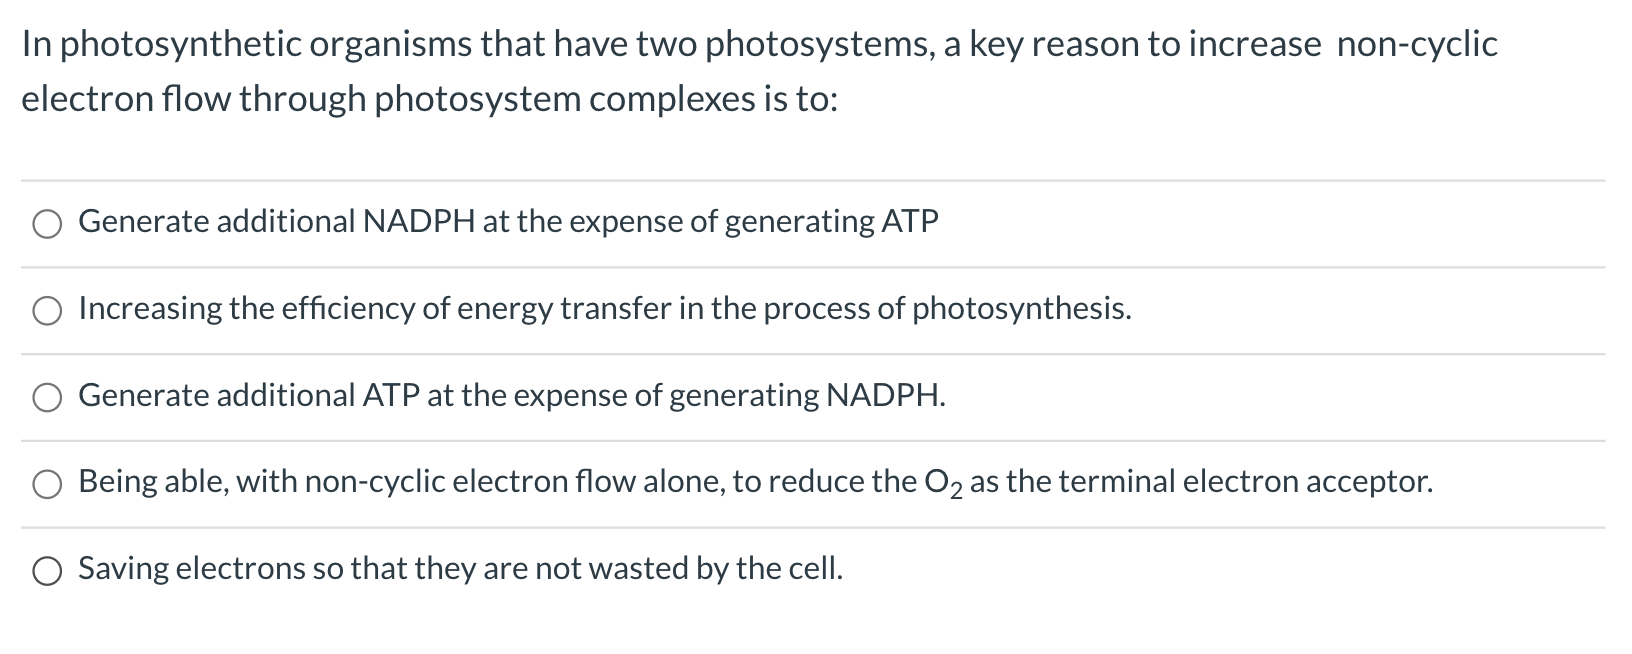 In photosynthetic organisms that have two photosystems, a key reason to increase non-cyclic
electron flow through photosystem complexes is to:
